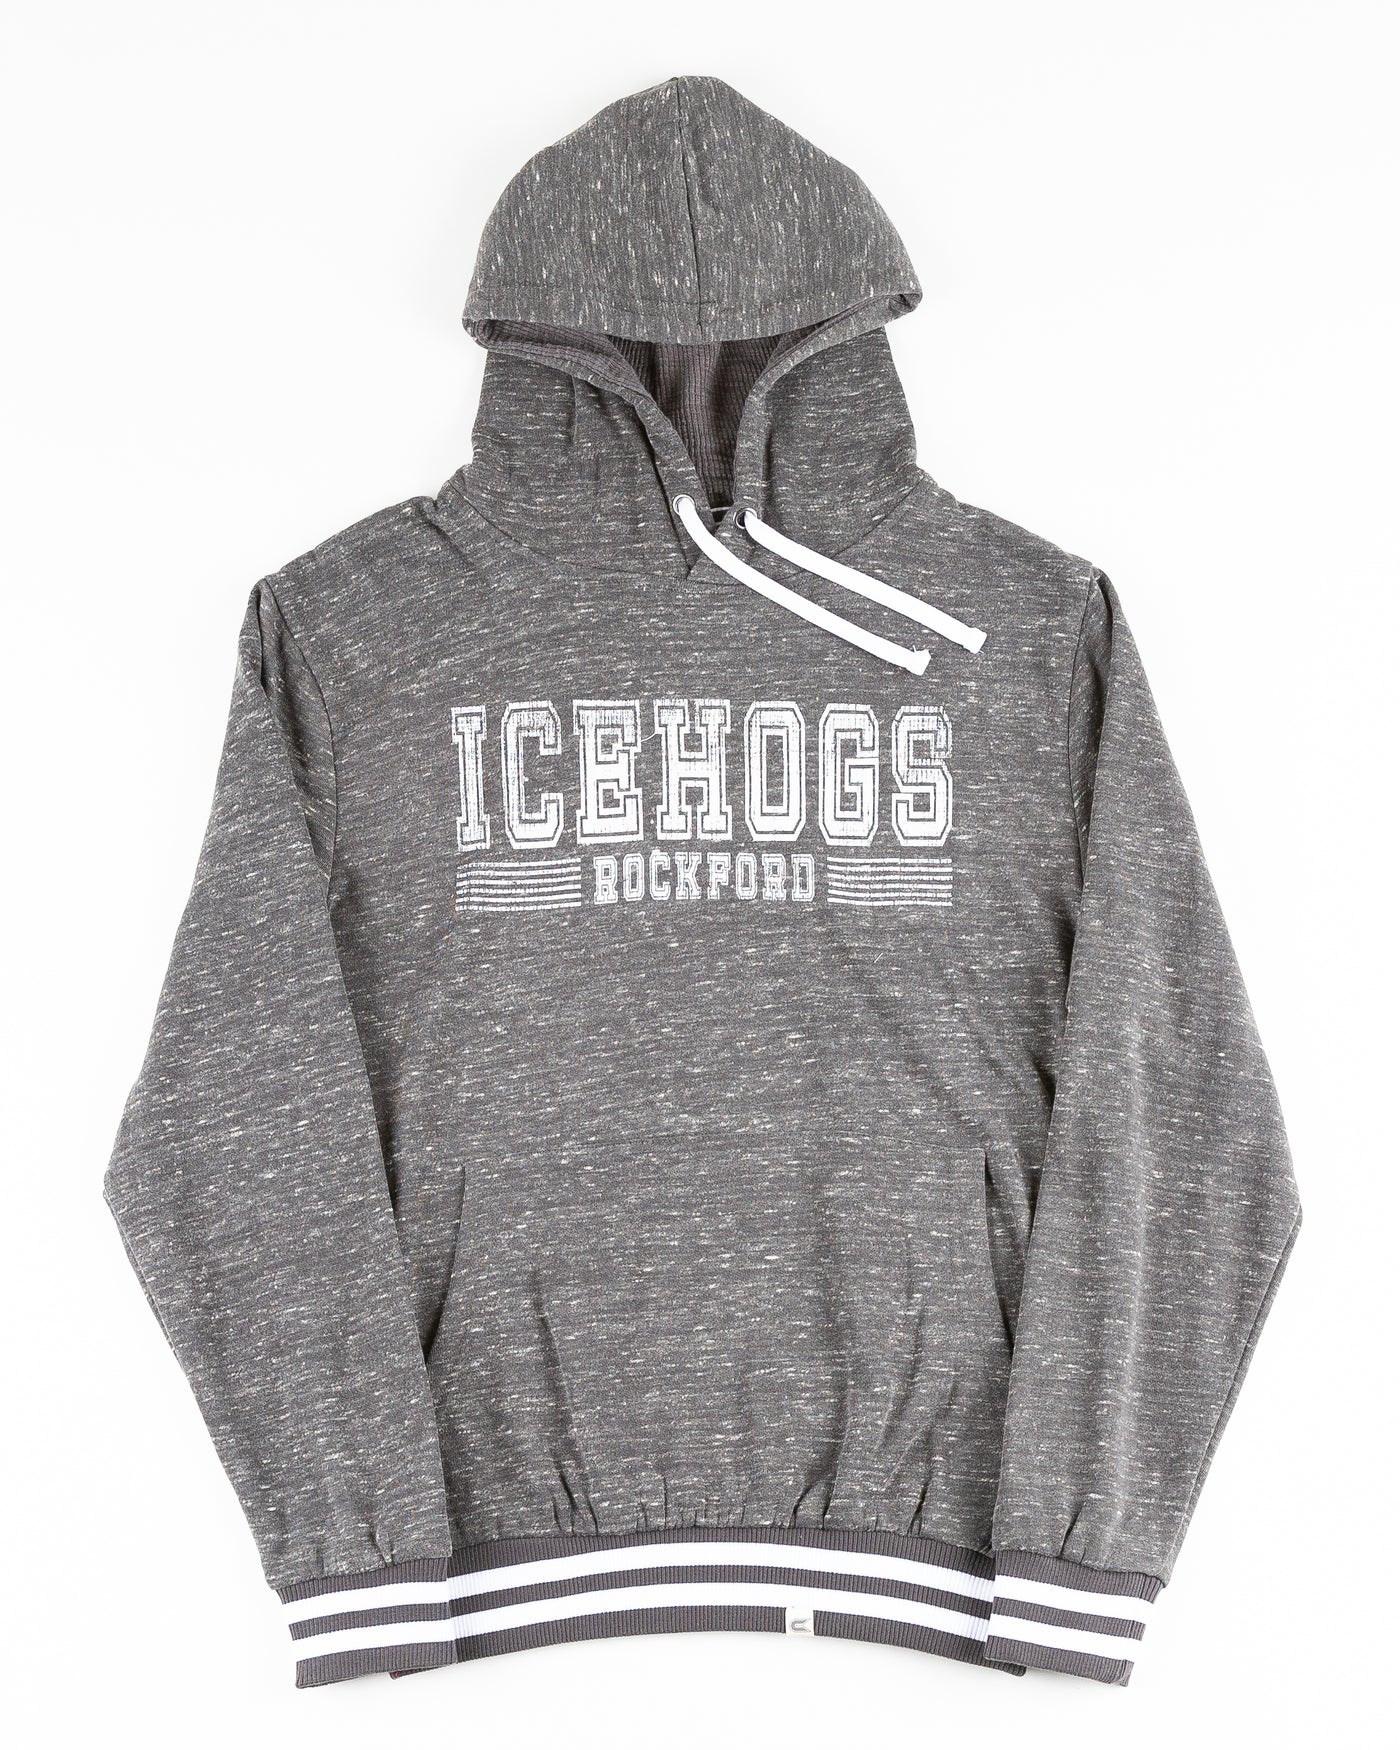 grey Colosseum hoodie with Rockford IceHogs wordmark graphic across chest - front lay flat